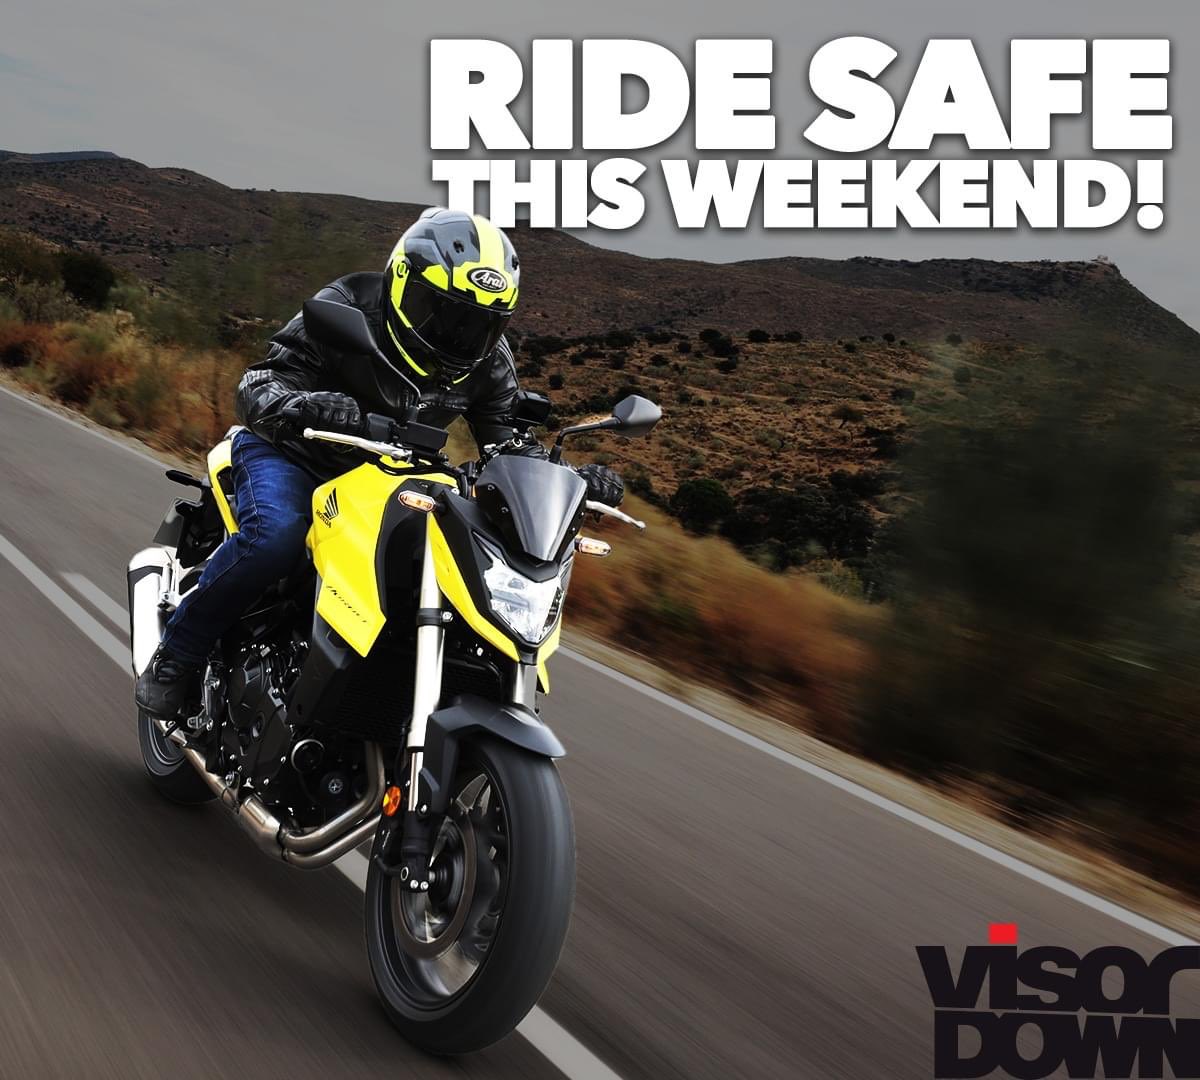 It's bank holiday weekend - and the weather is looking good.
Enjoy it, but take it steady. Especially if this is your first outing this year! 👍

#RideSafe #ThinkBike #Visordown